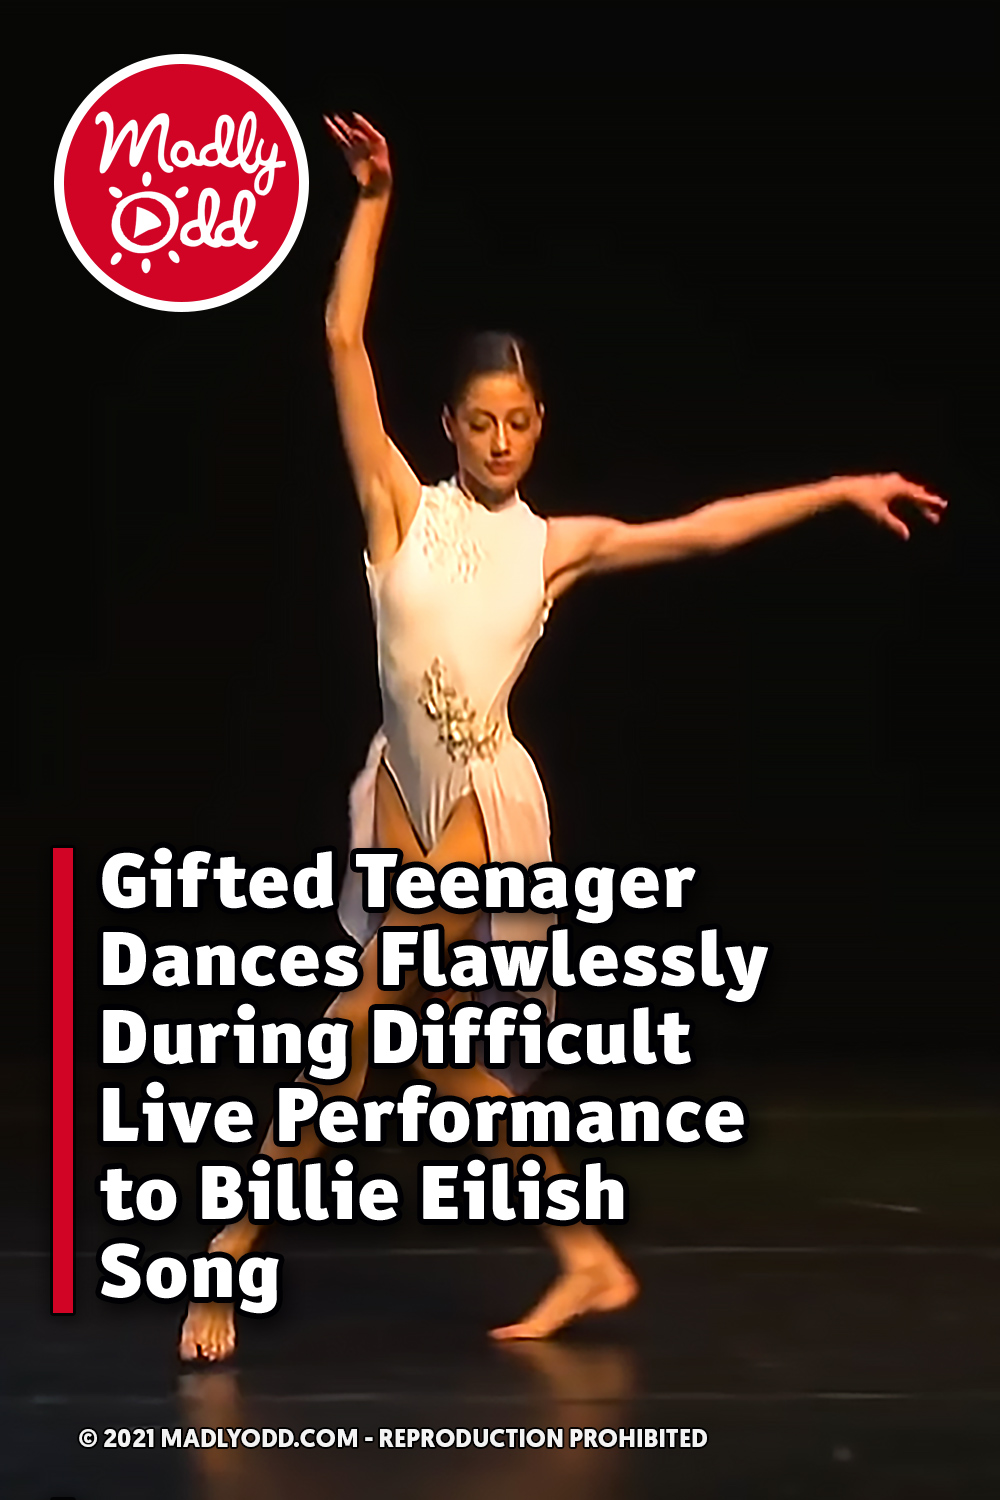 Gifted Teenager Dances Flawlessly During Difficult Live Performance to Billie Eilish Song